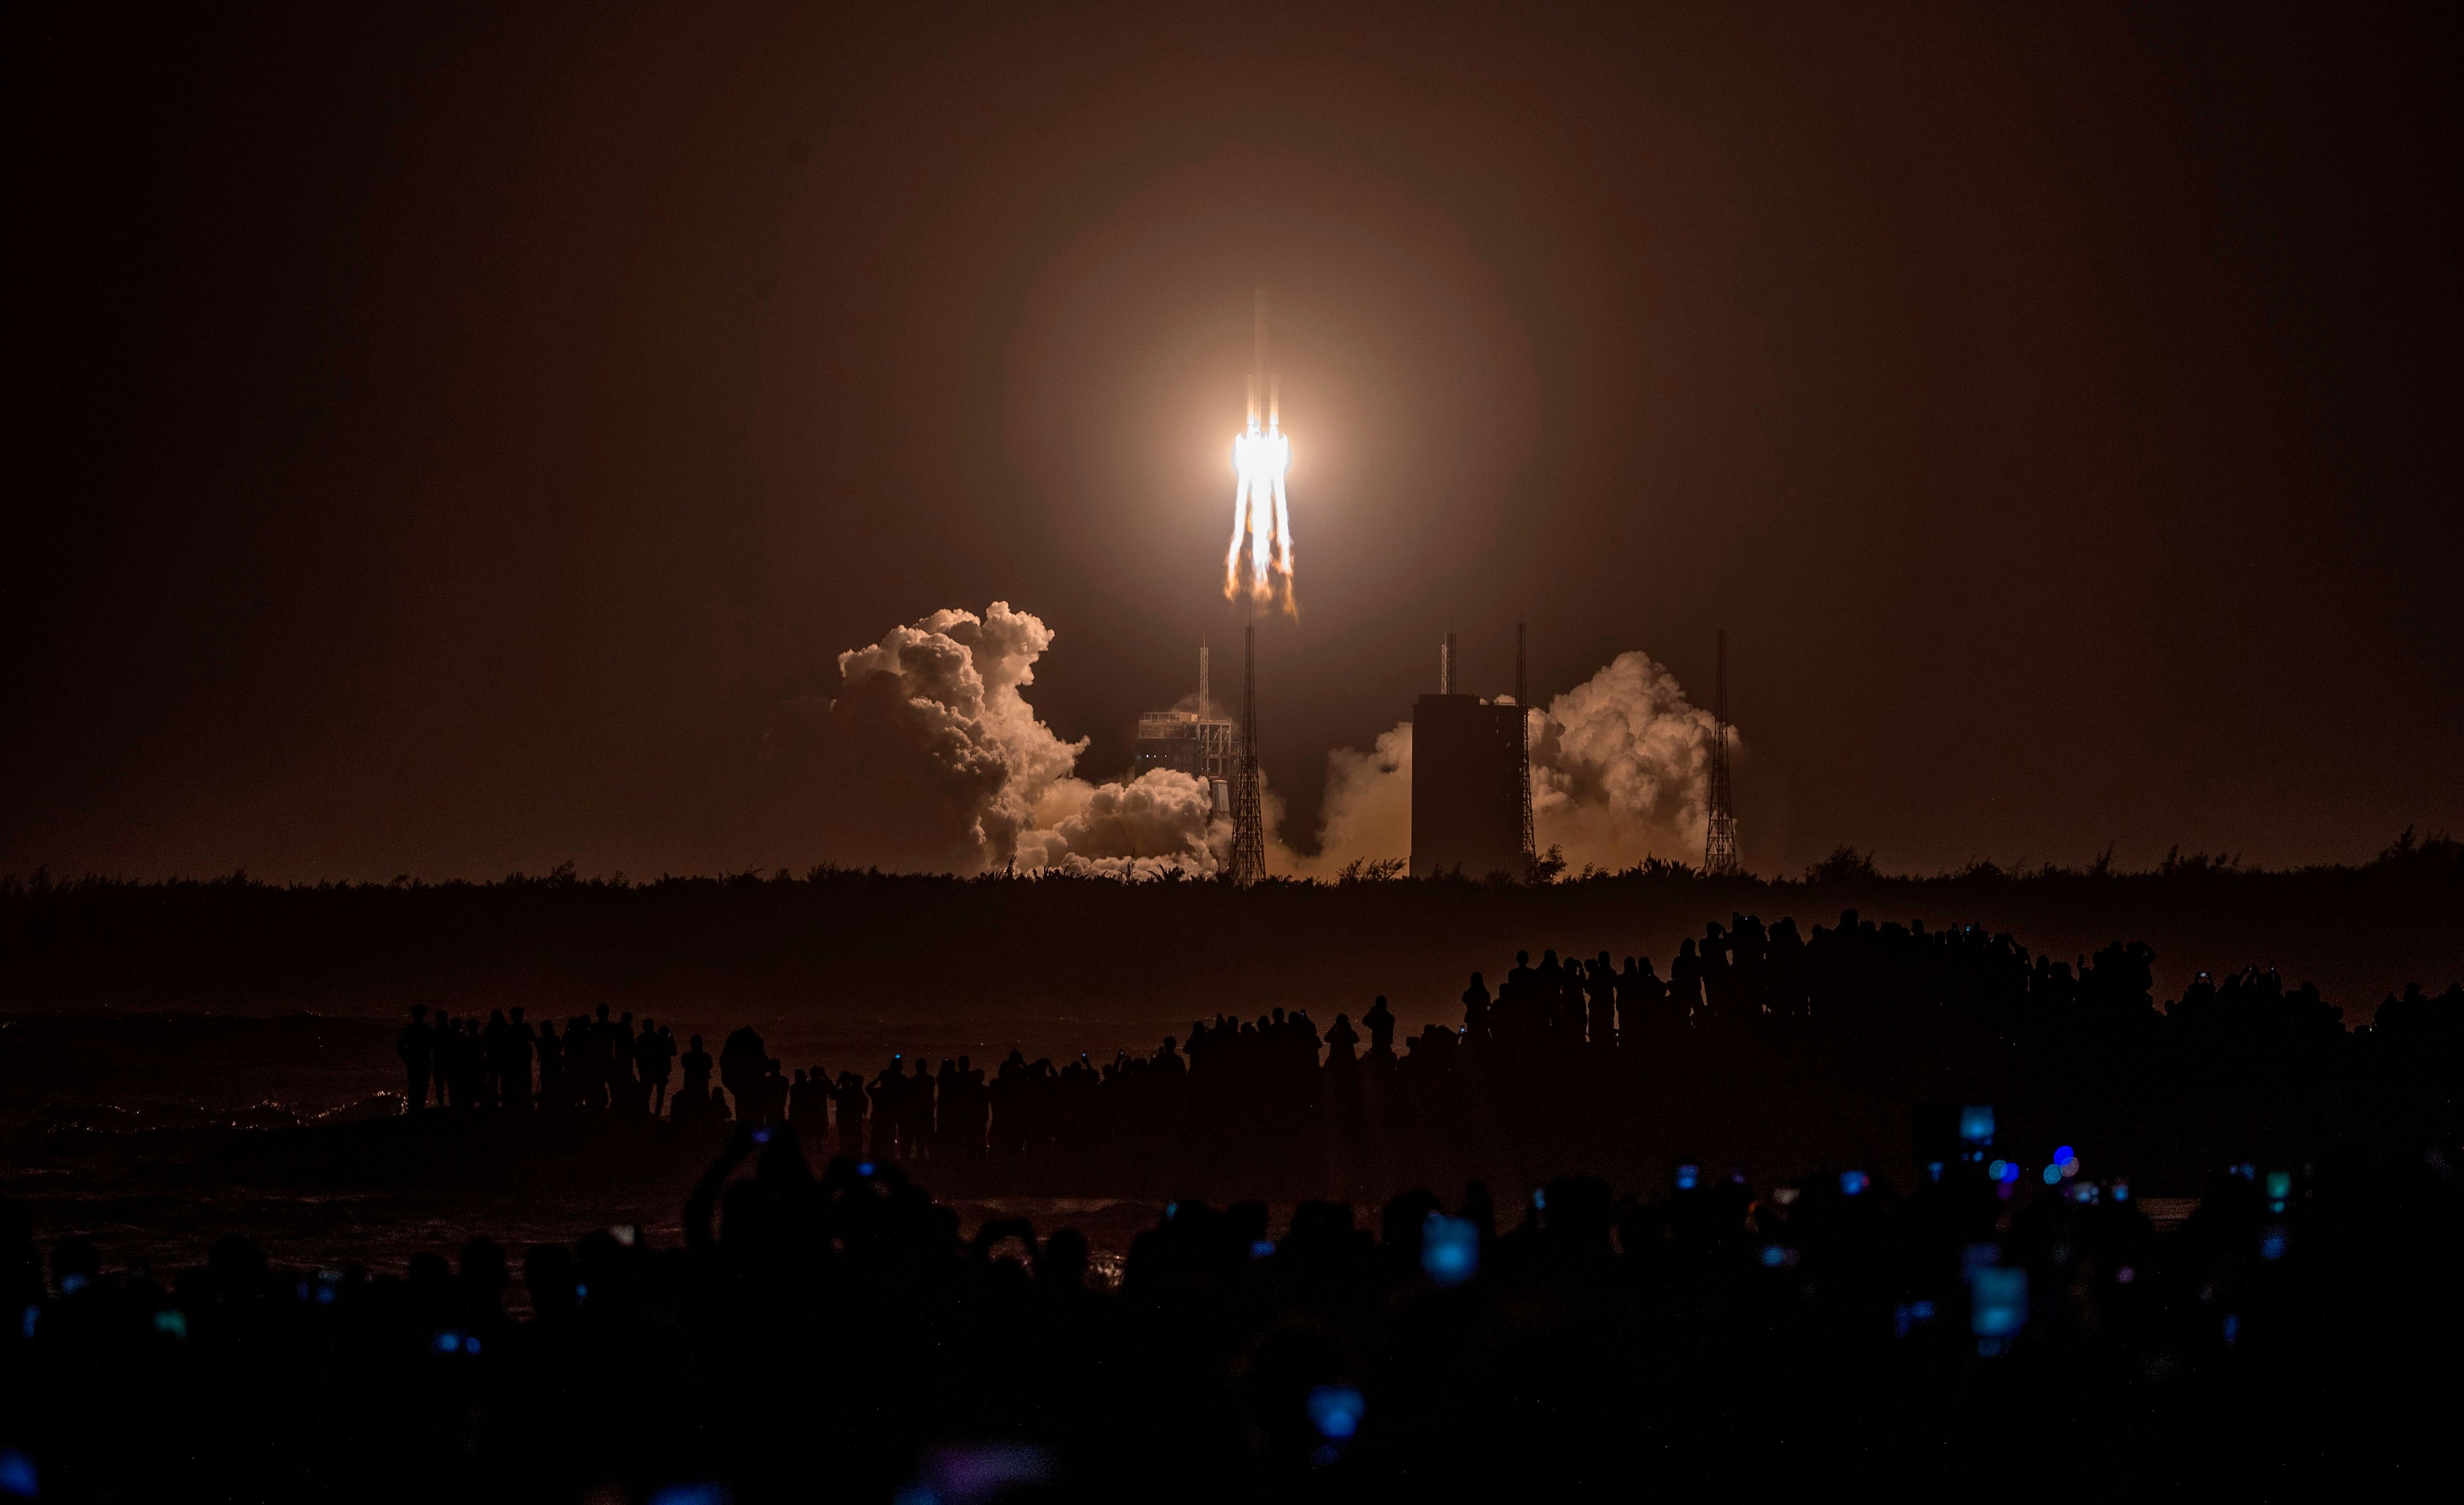 A Long March 5 rocket carrying China's Chang'e-5 lunar probe launches from the Wenchang Space Center on China's southern Hainan Island. Credit: AFP Photo